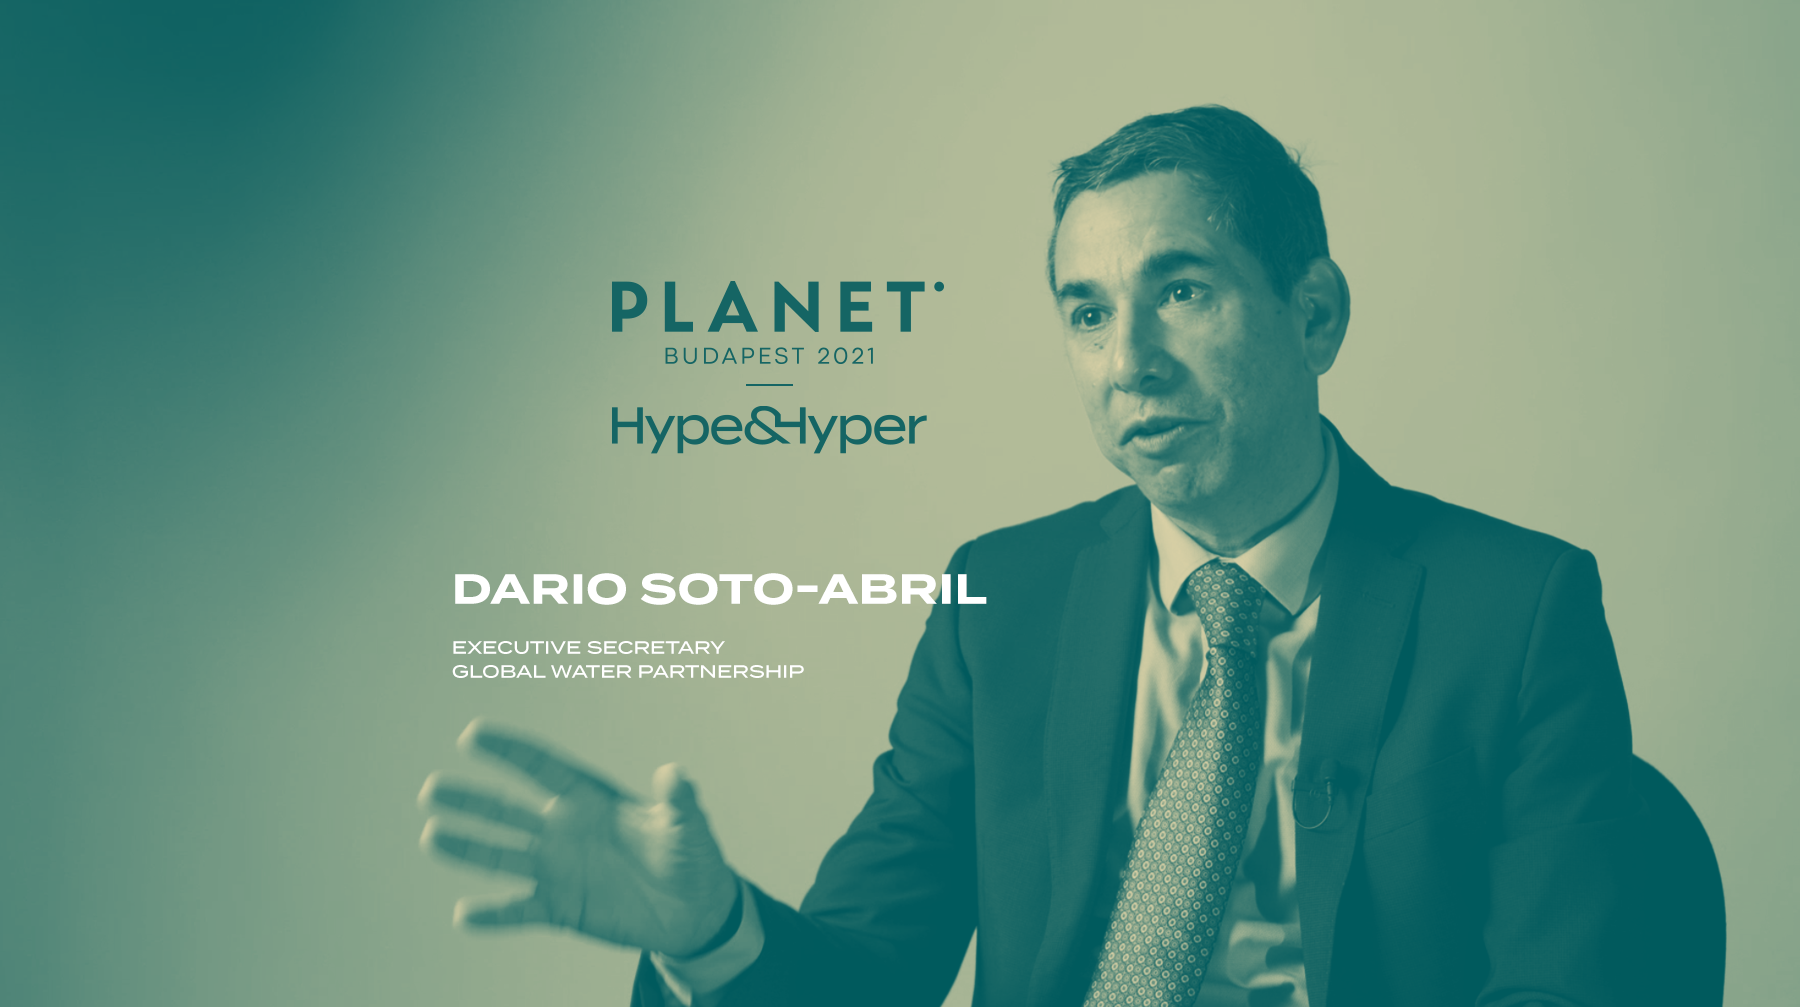 Human nature is wired to respond to short-term problems | Interview with Dario Soto-Abril on water management